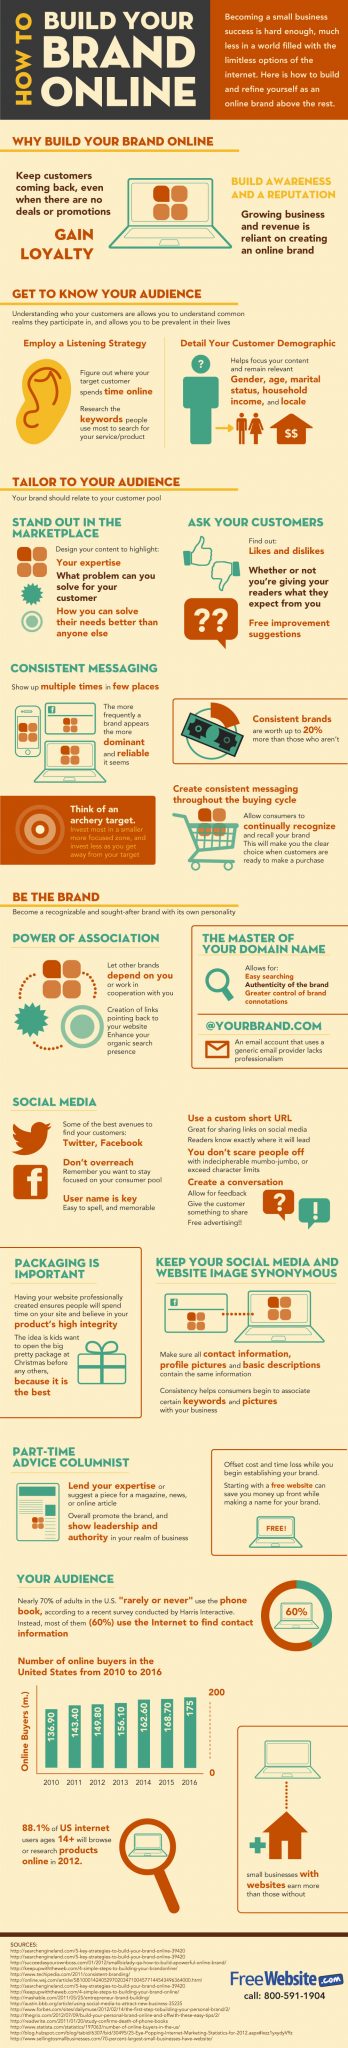 How to build your brand online